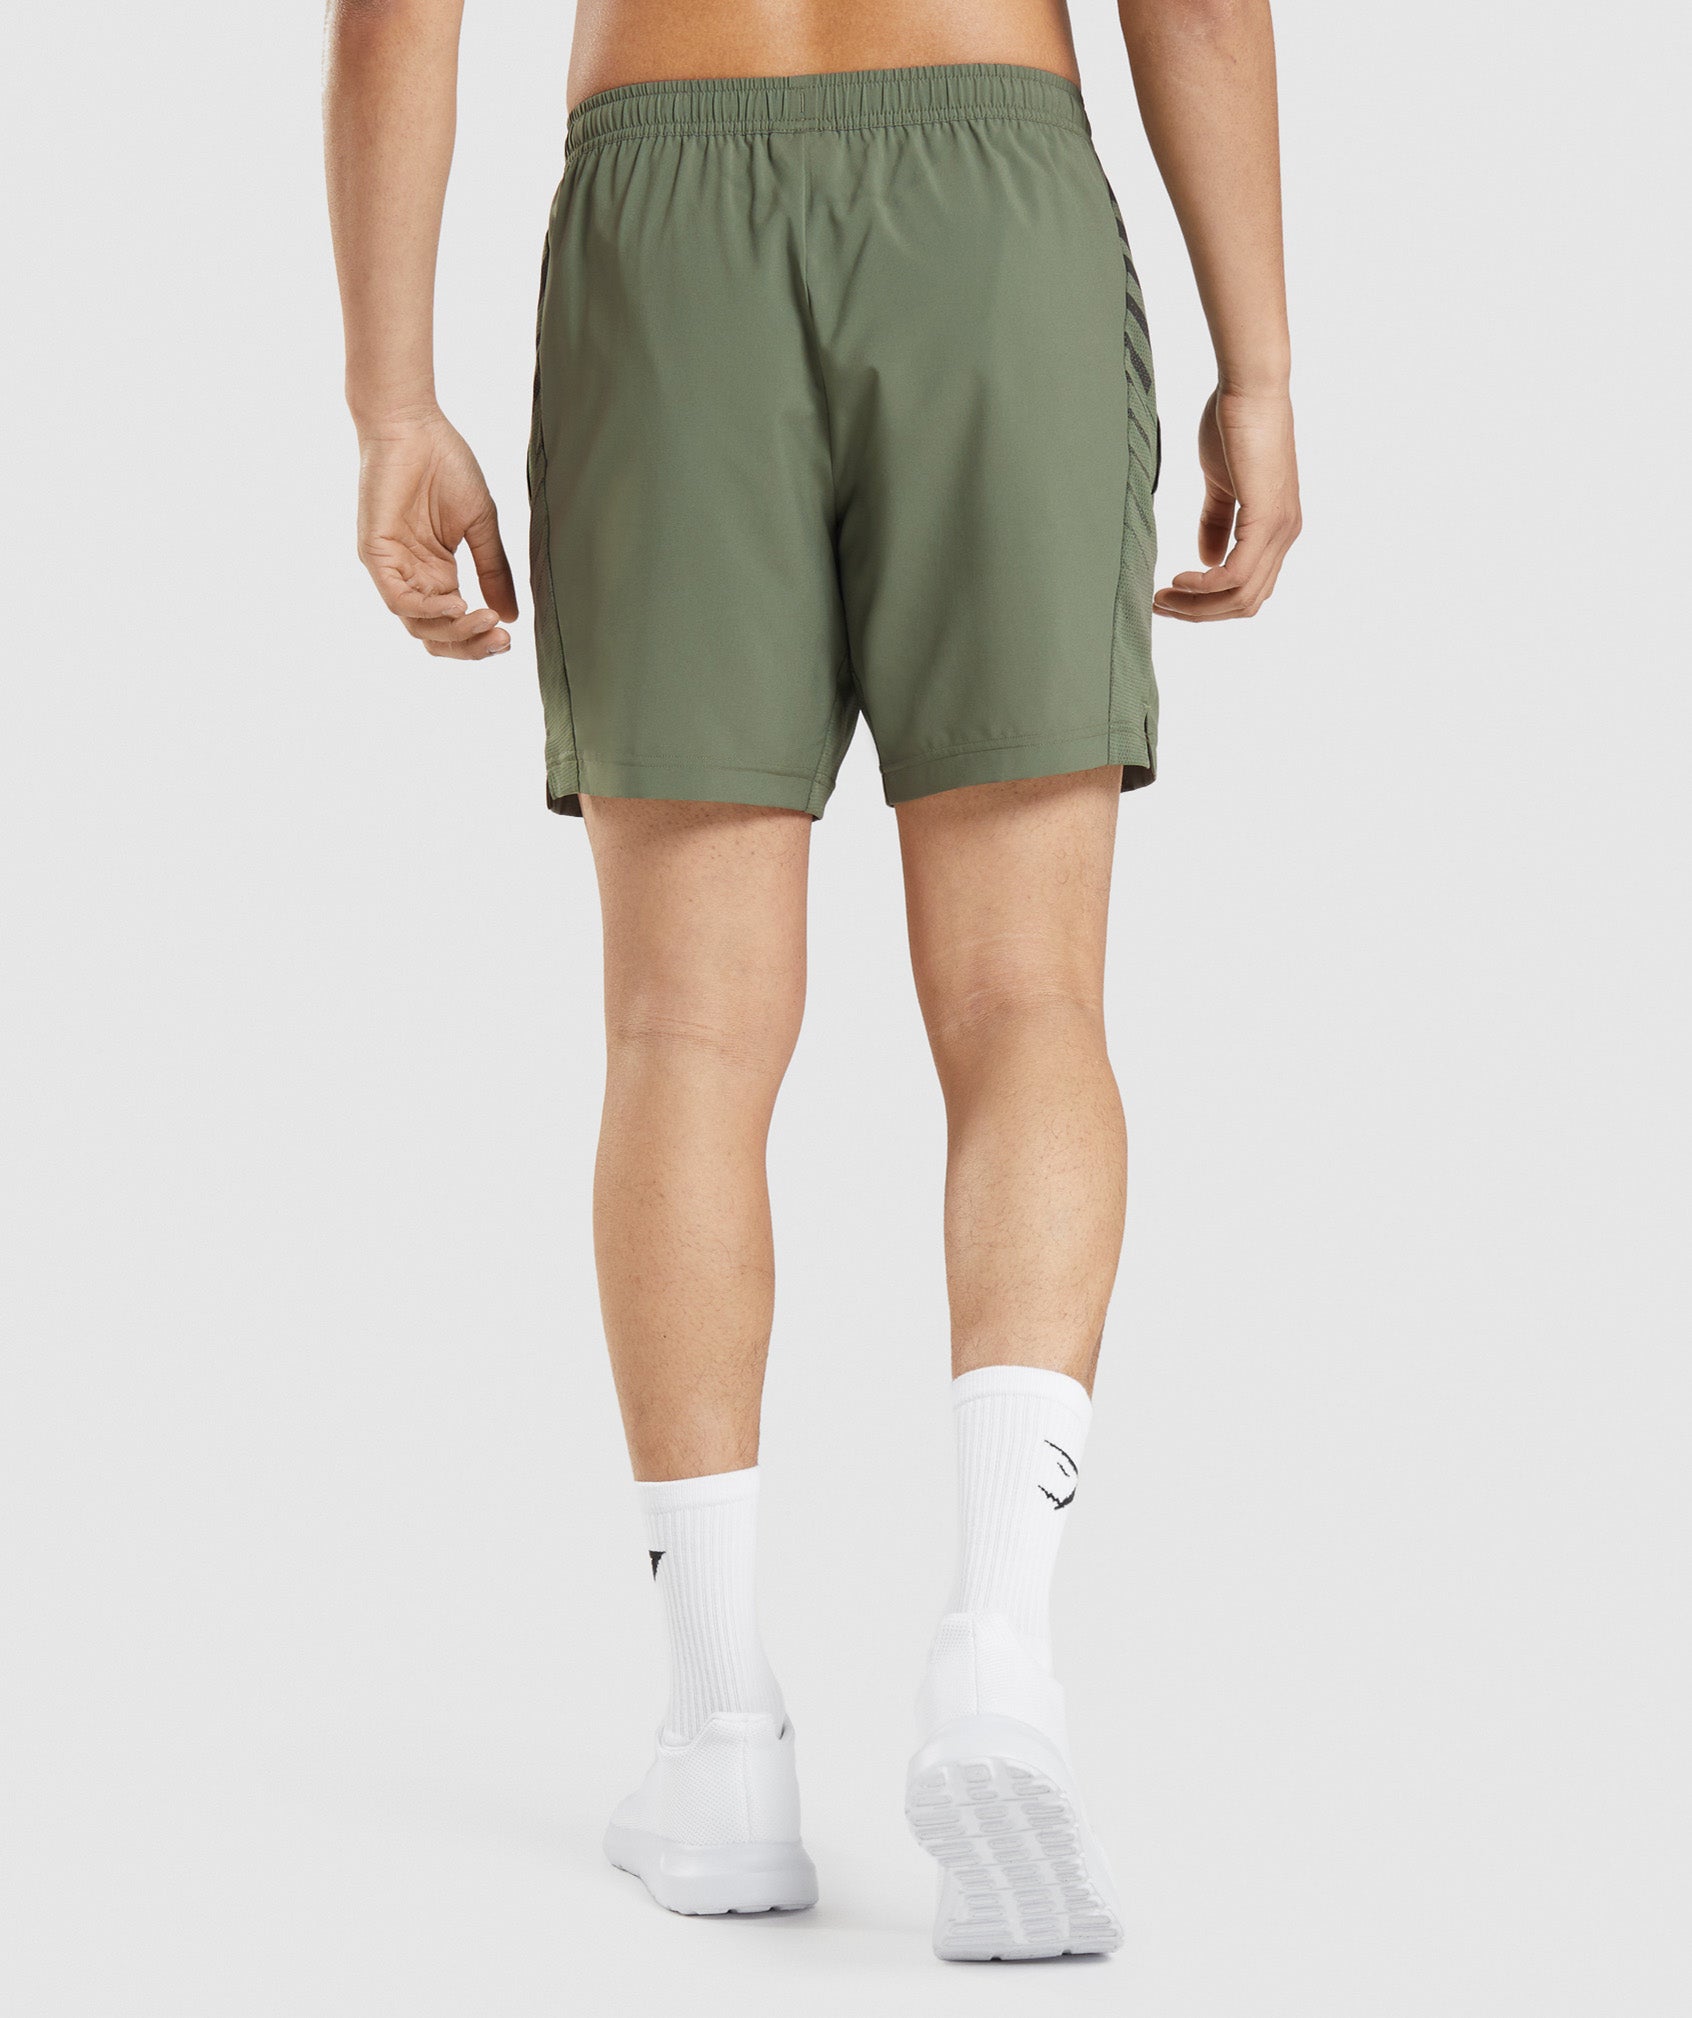 Sport Stripe 7" Shorts in Core Olive - view 2